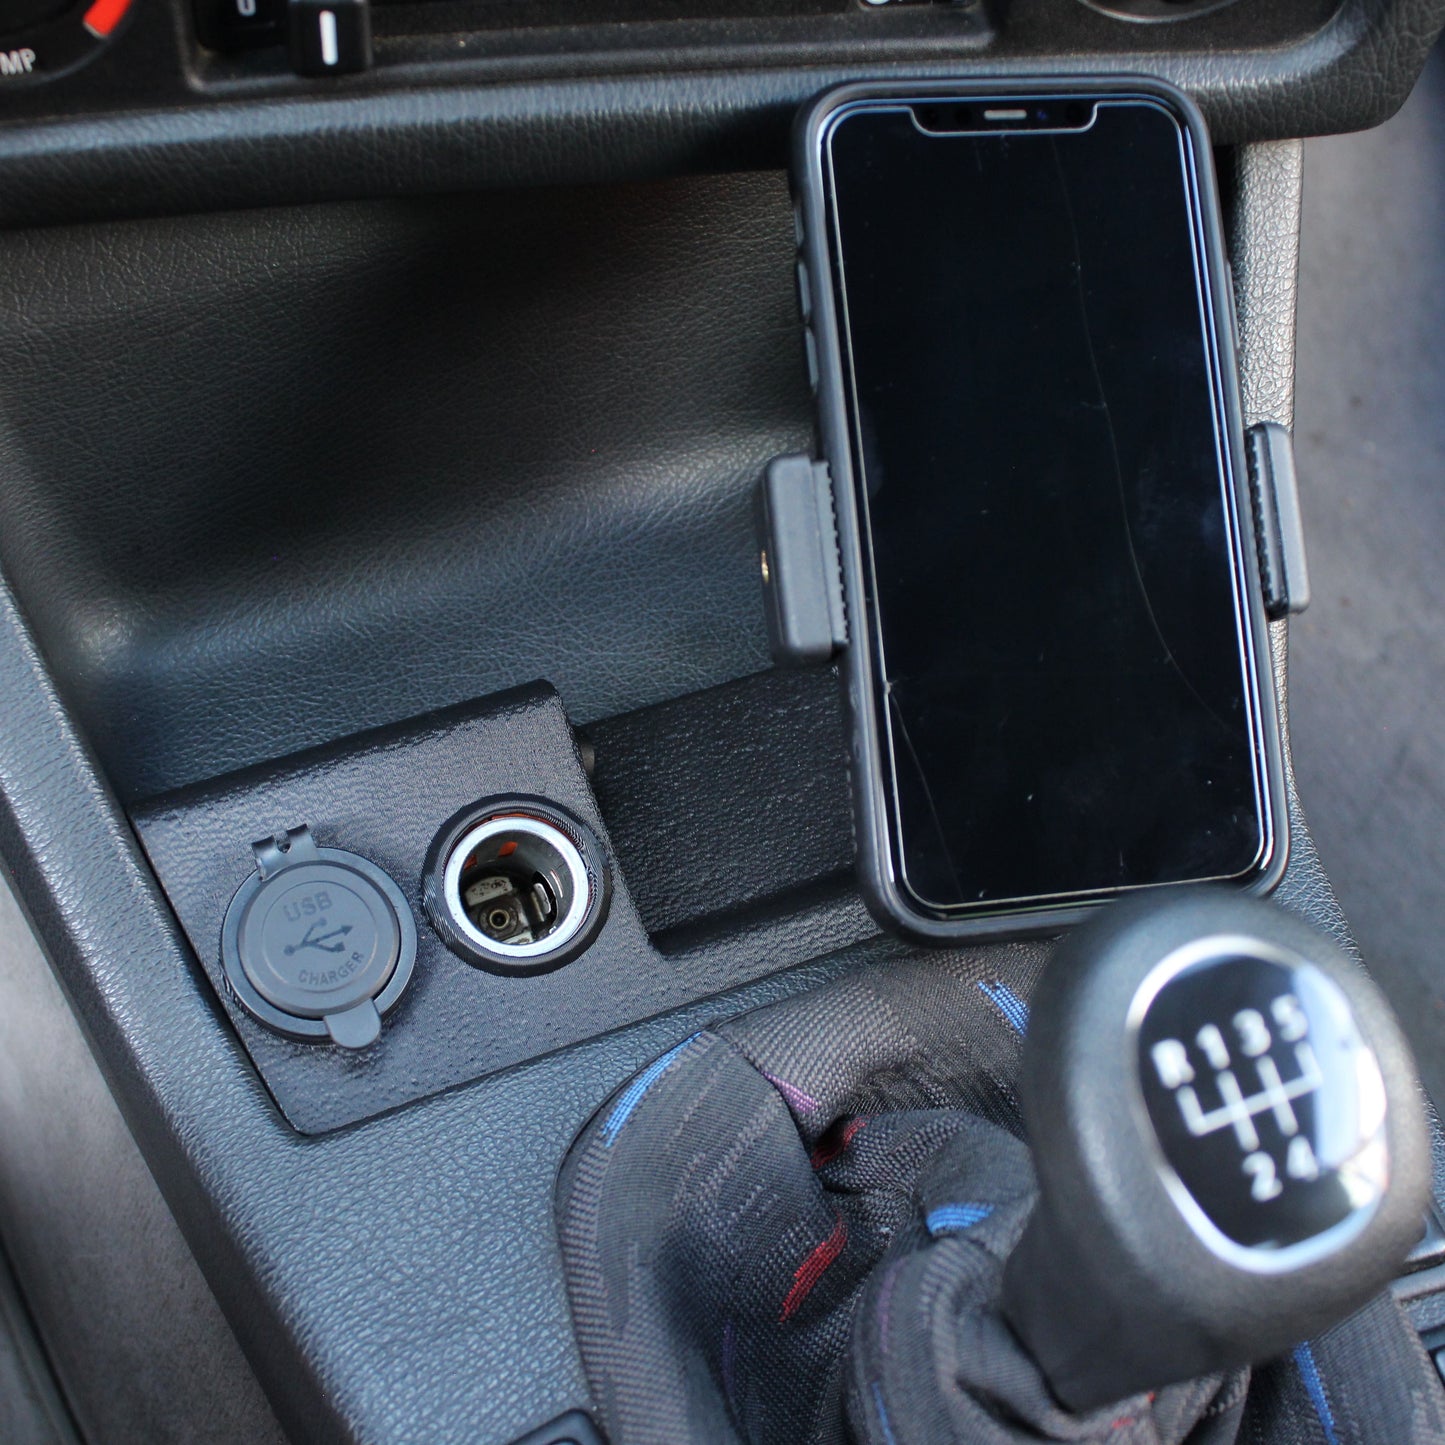 BMW E30 Utility Panel Ashtray Replacement & Phone Mount - Combination USB charge socket and stock 12V power outlet